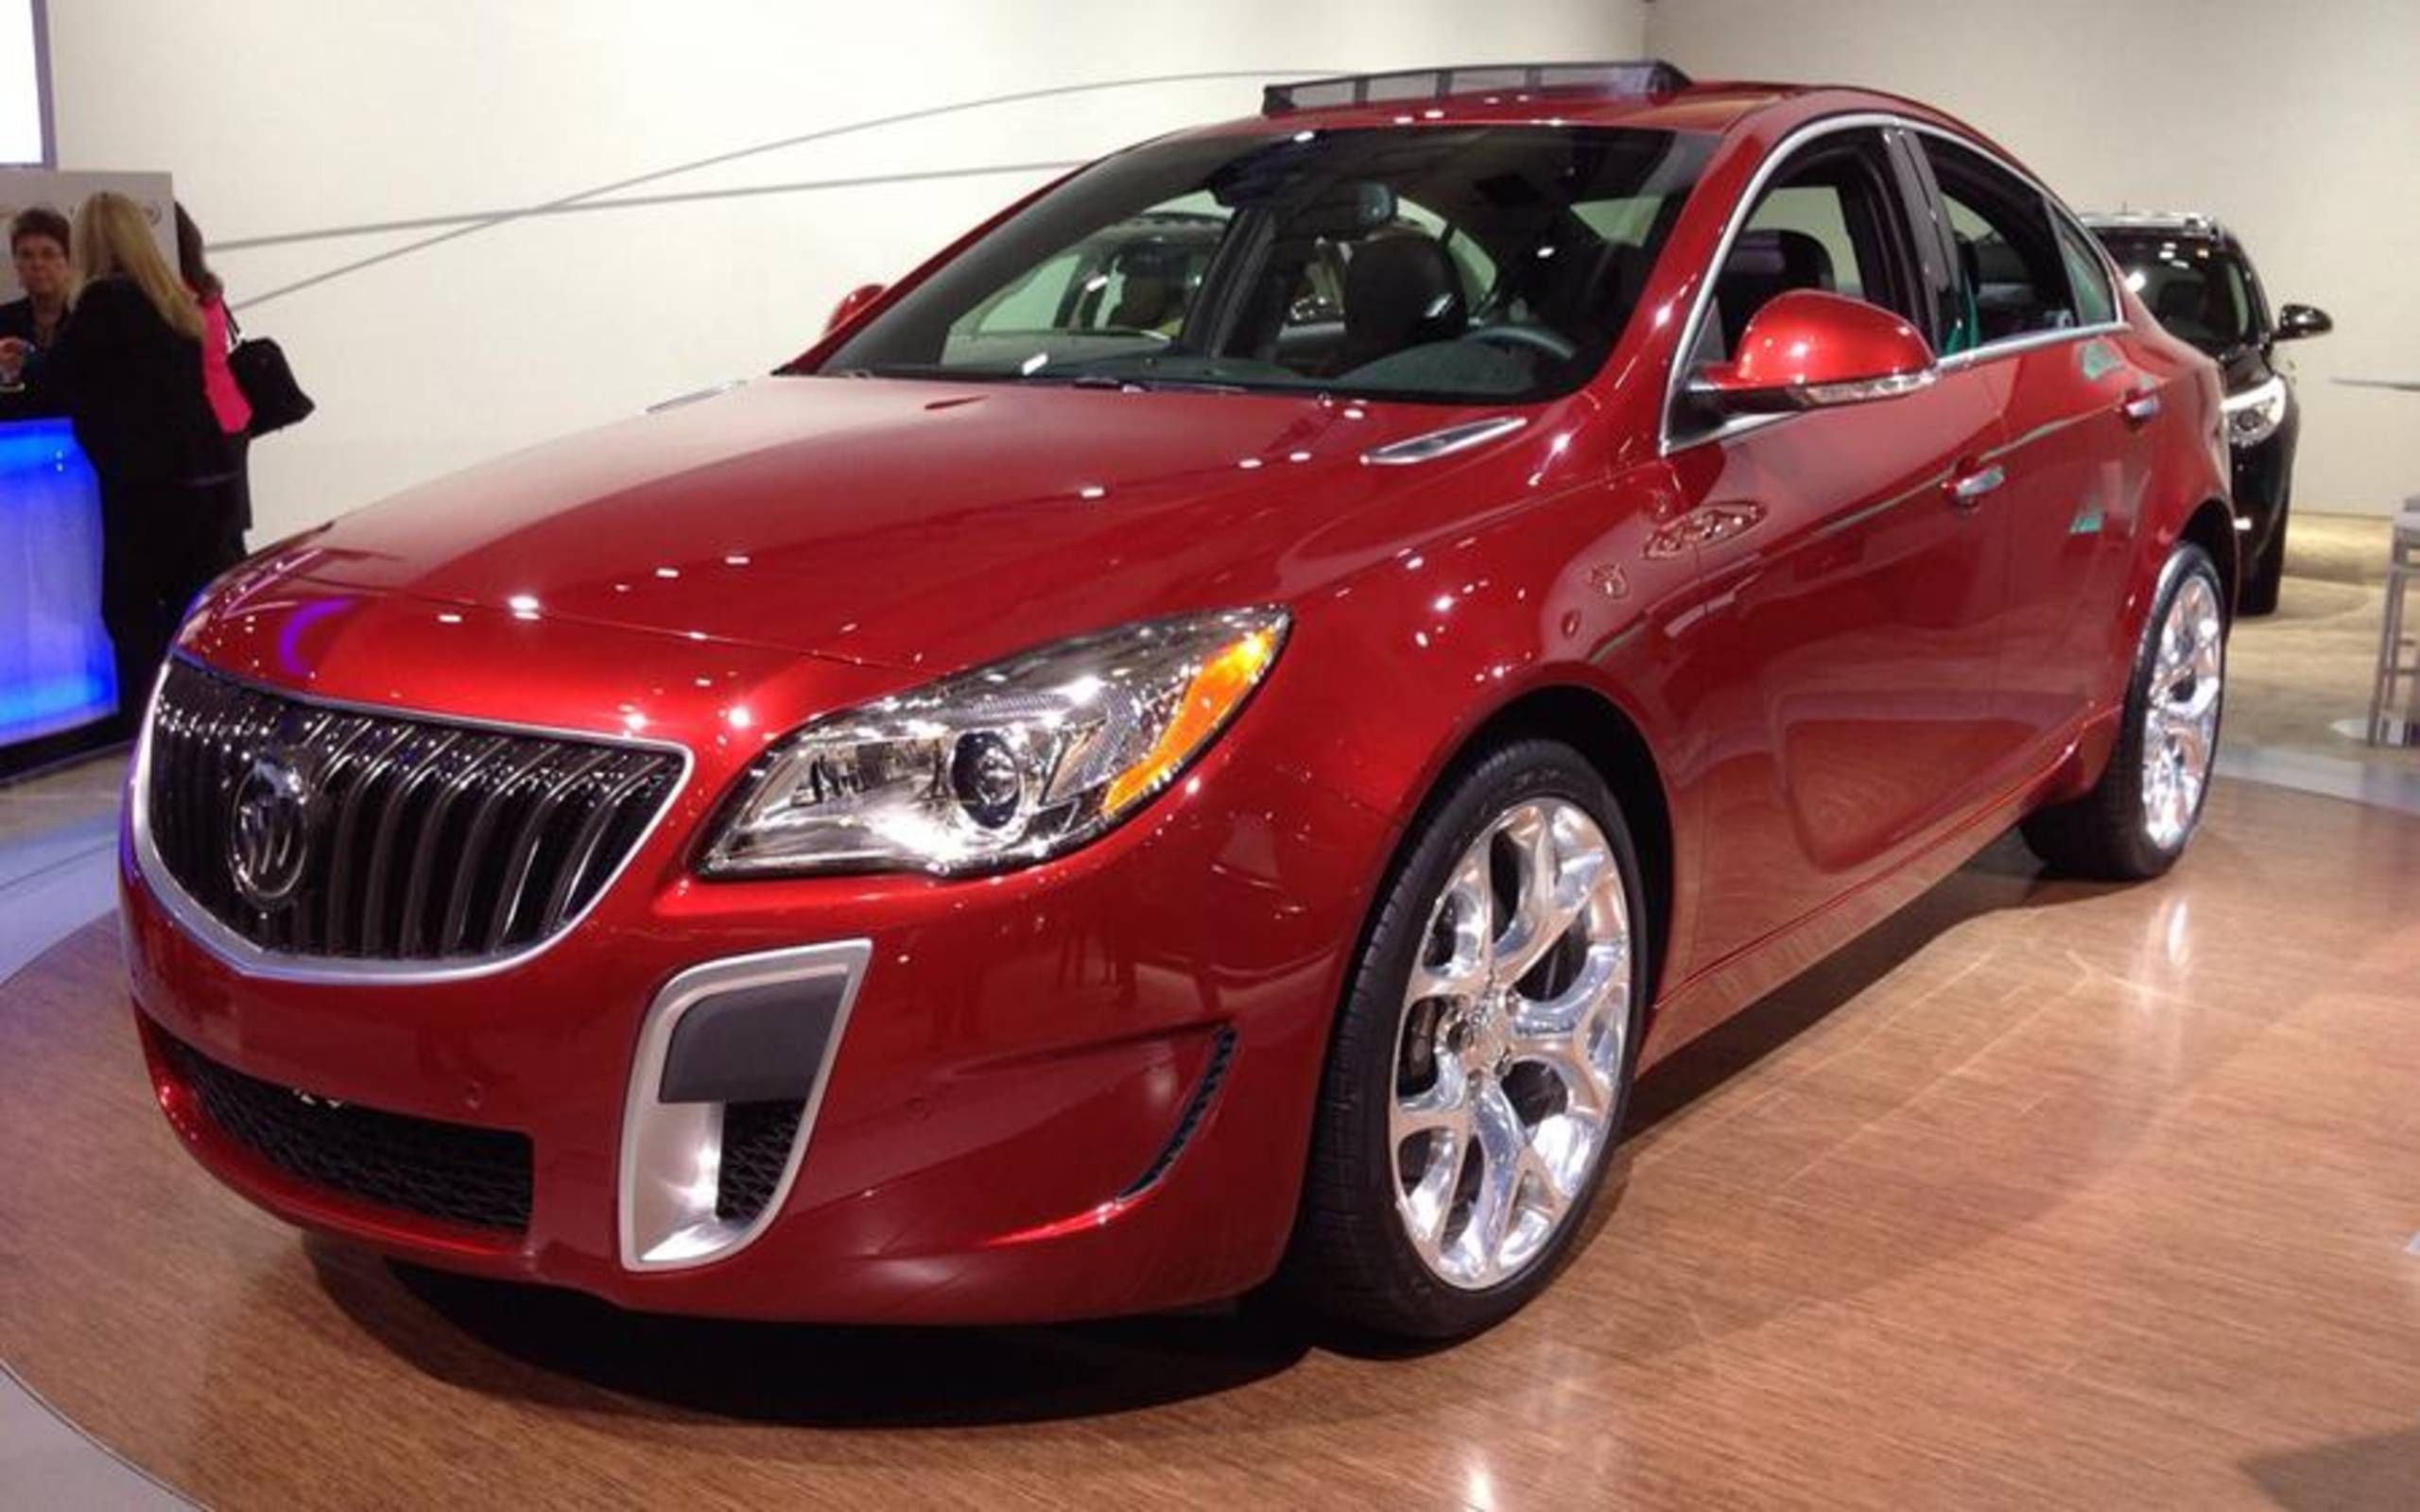 2014 Buick Regal gets New York auto show debut